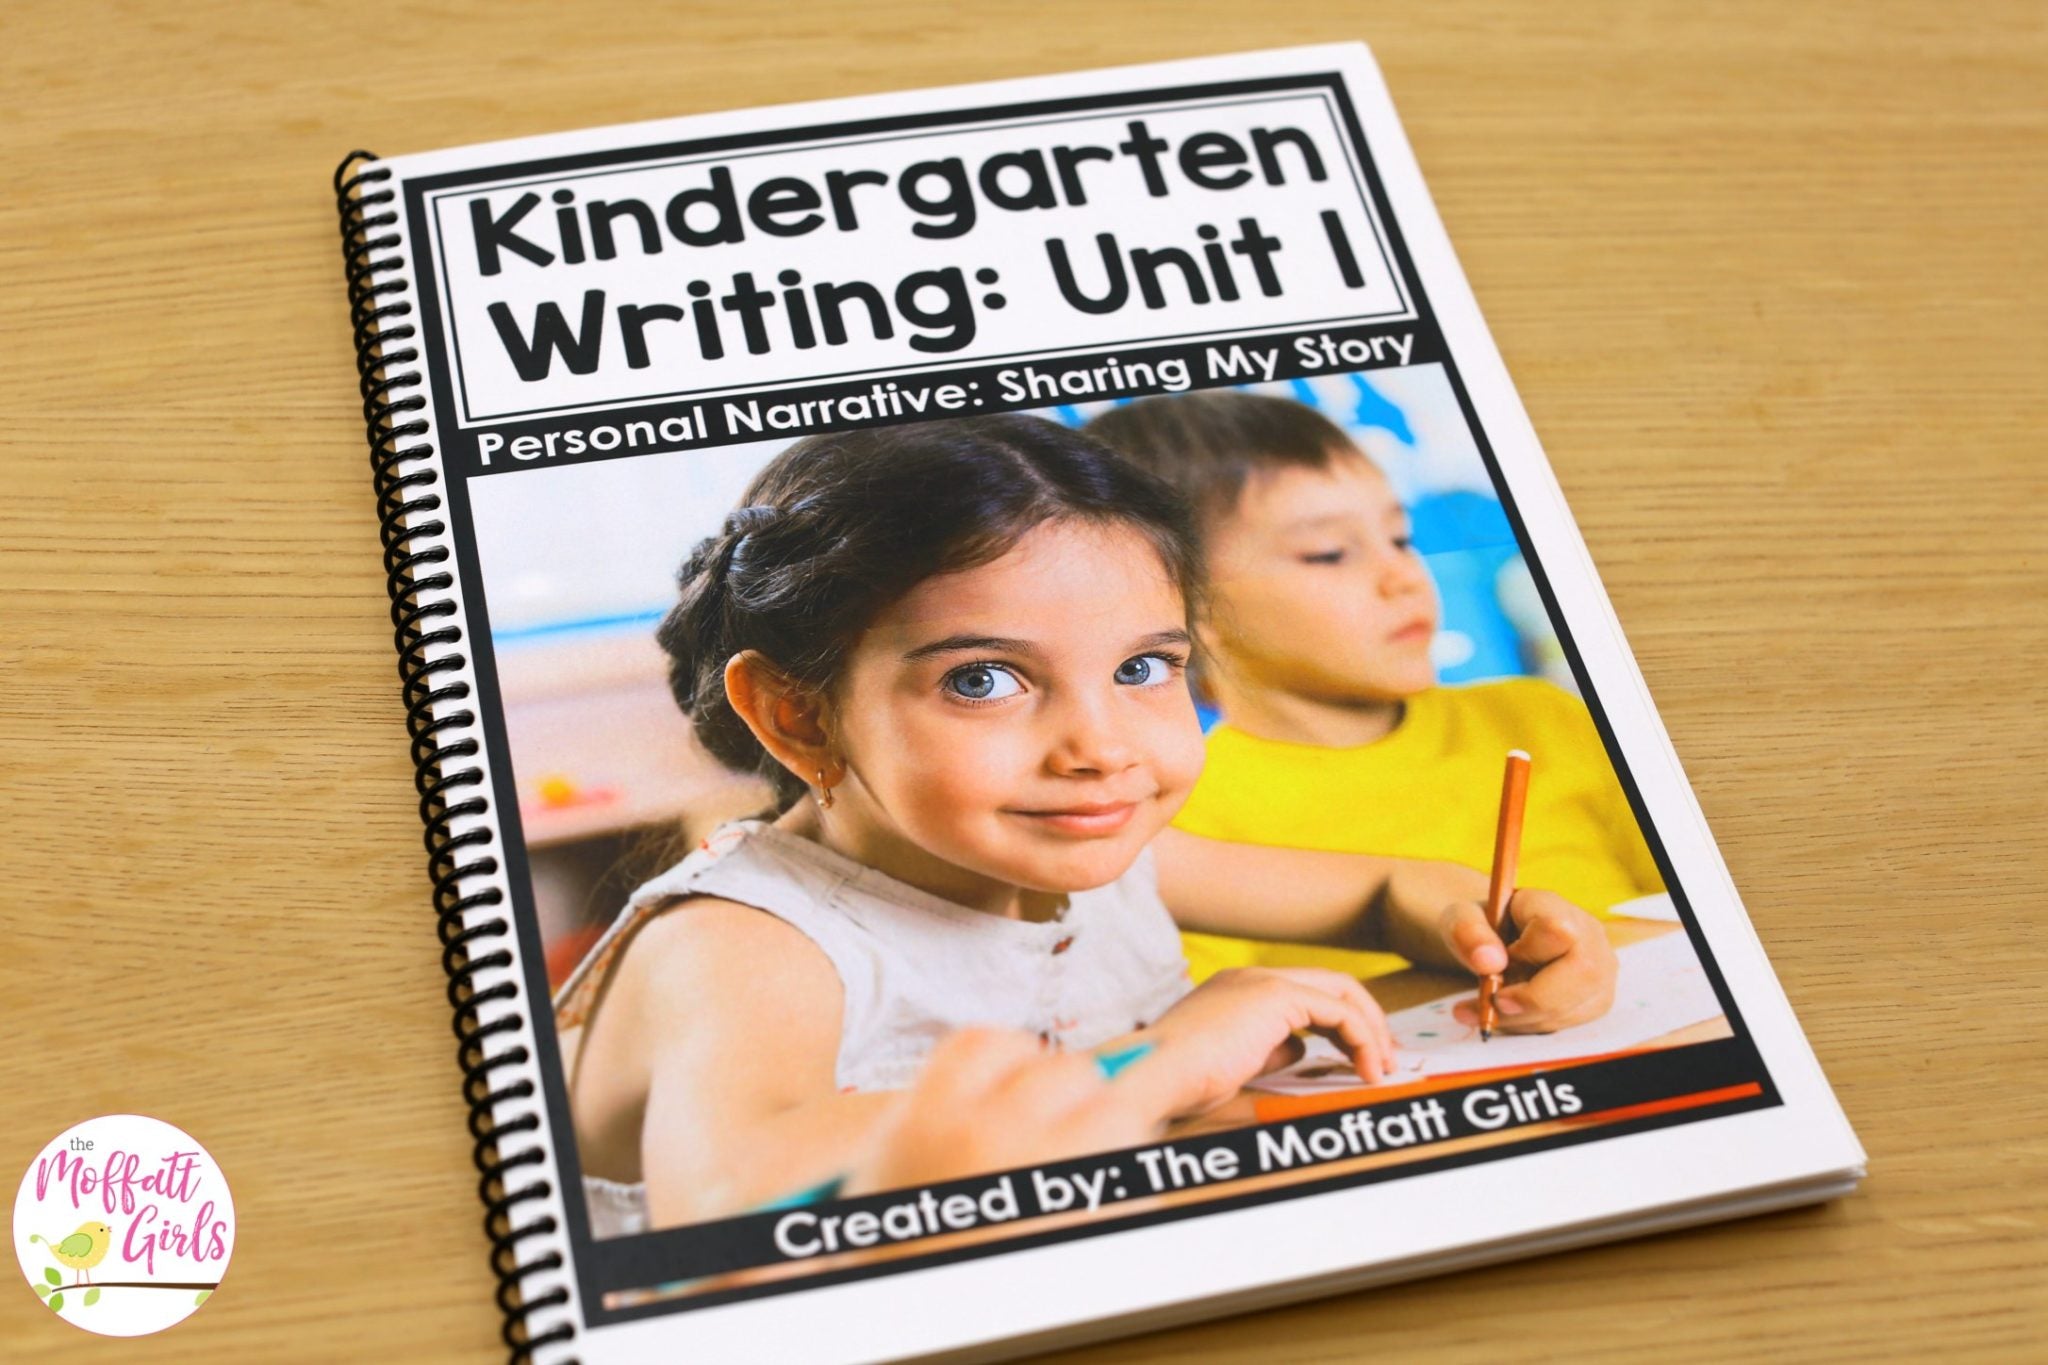 Teaching writing in kindergarten can be one of the most challenging aspects of teaching